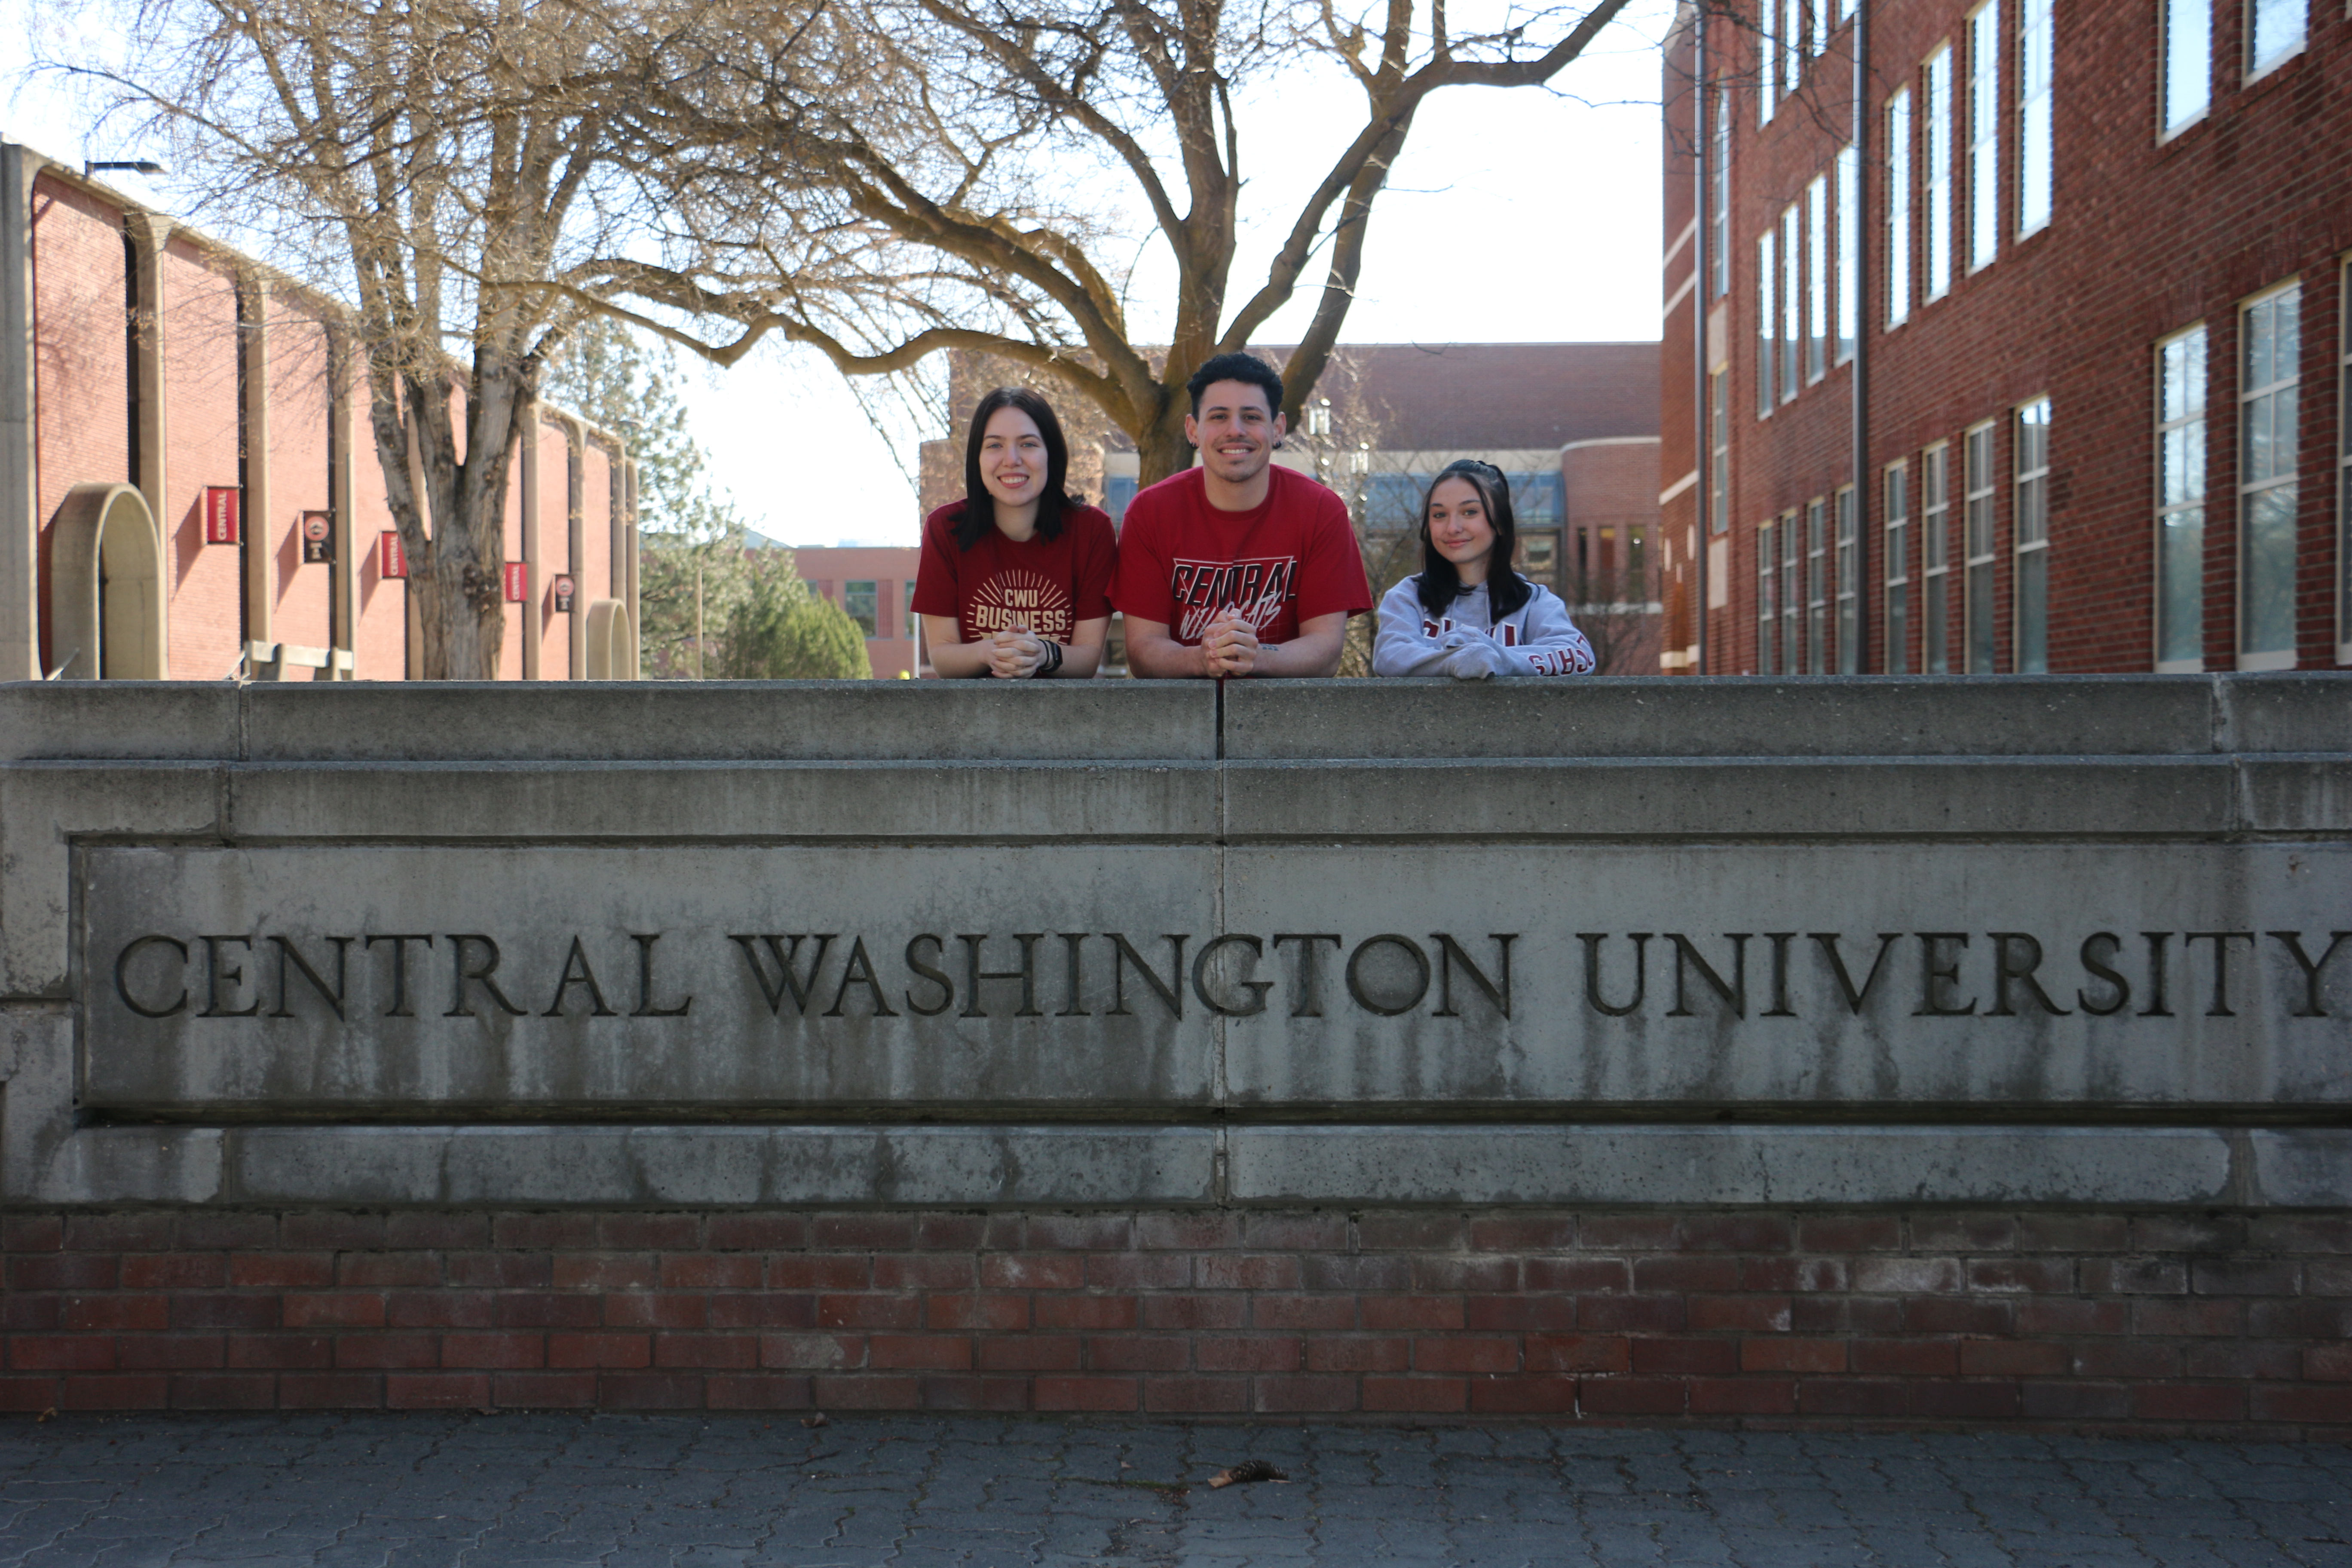 group of 3 students standing behind stone sign that says Central Washington University